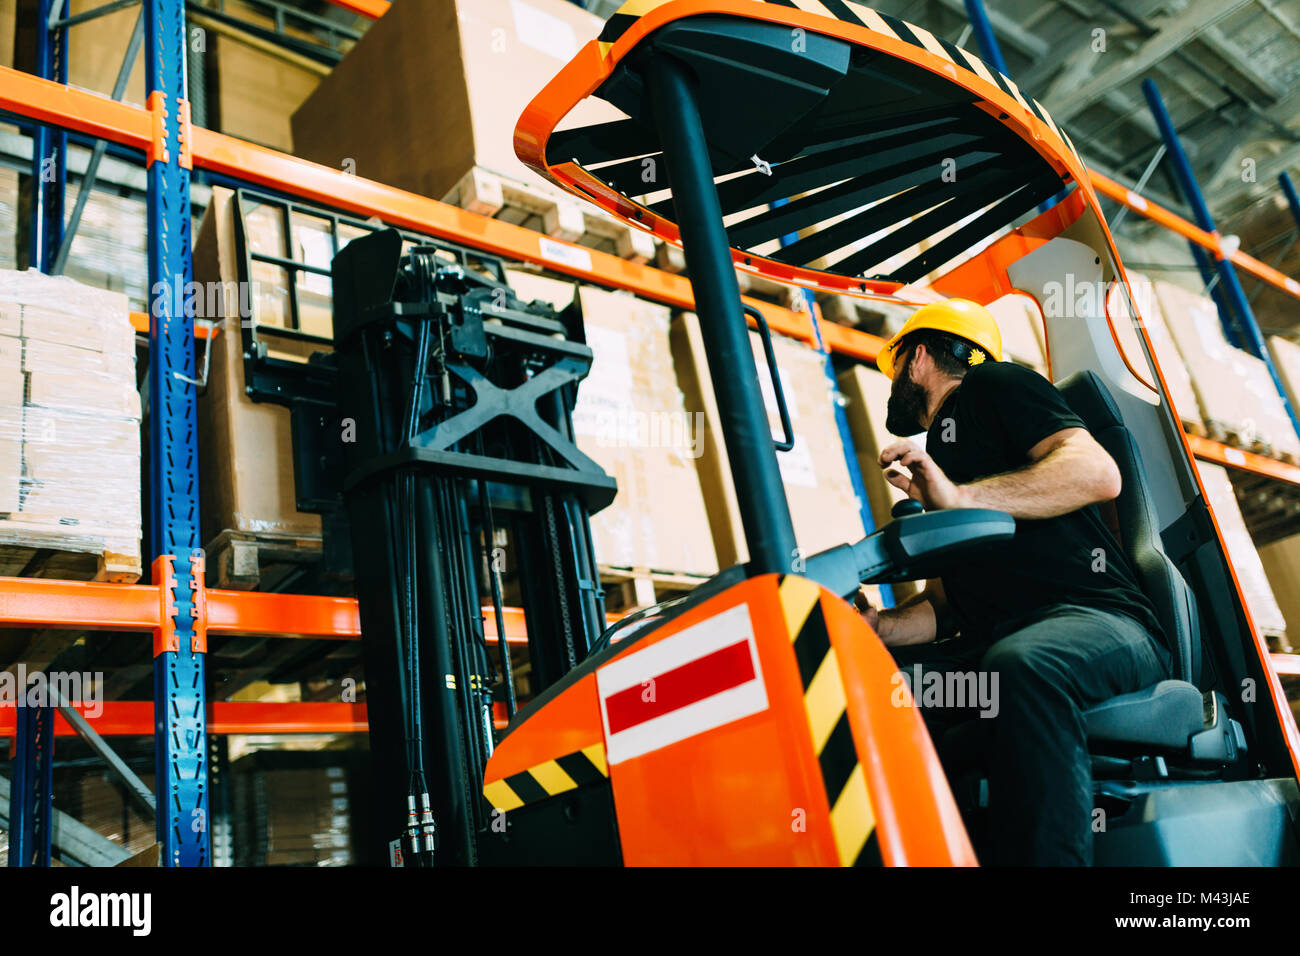 Warehouse worker doing logistics work with forklift loader Stock Photo